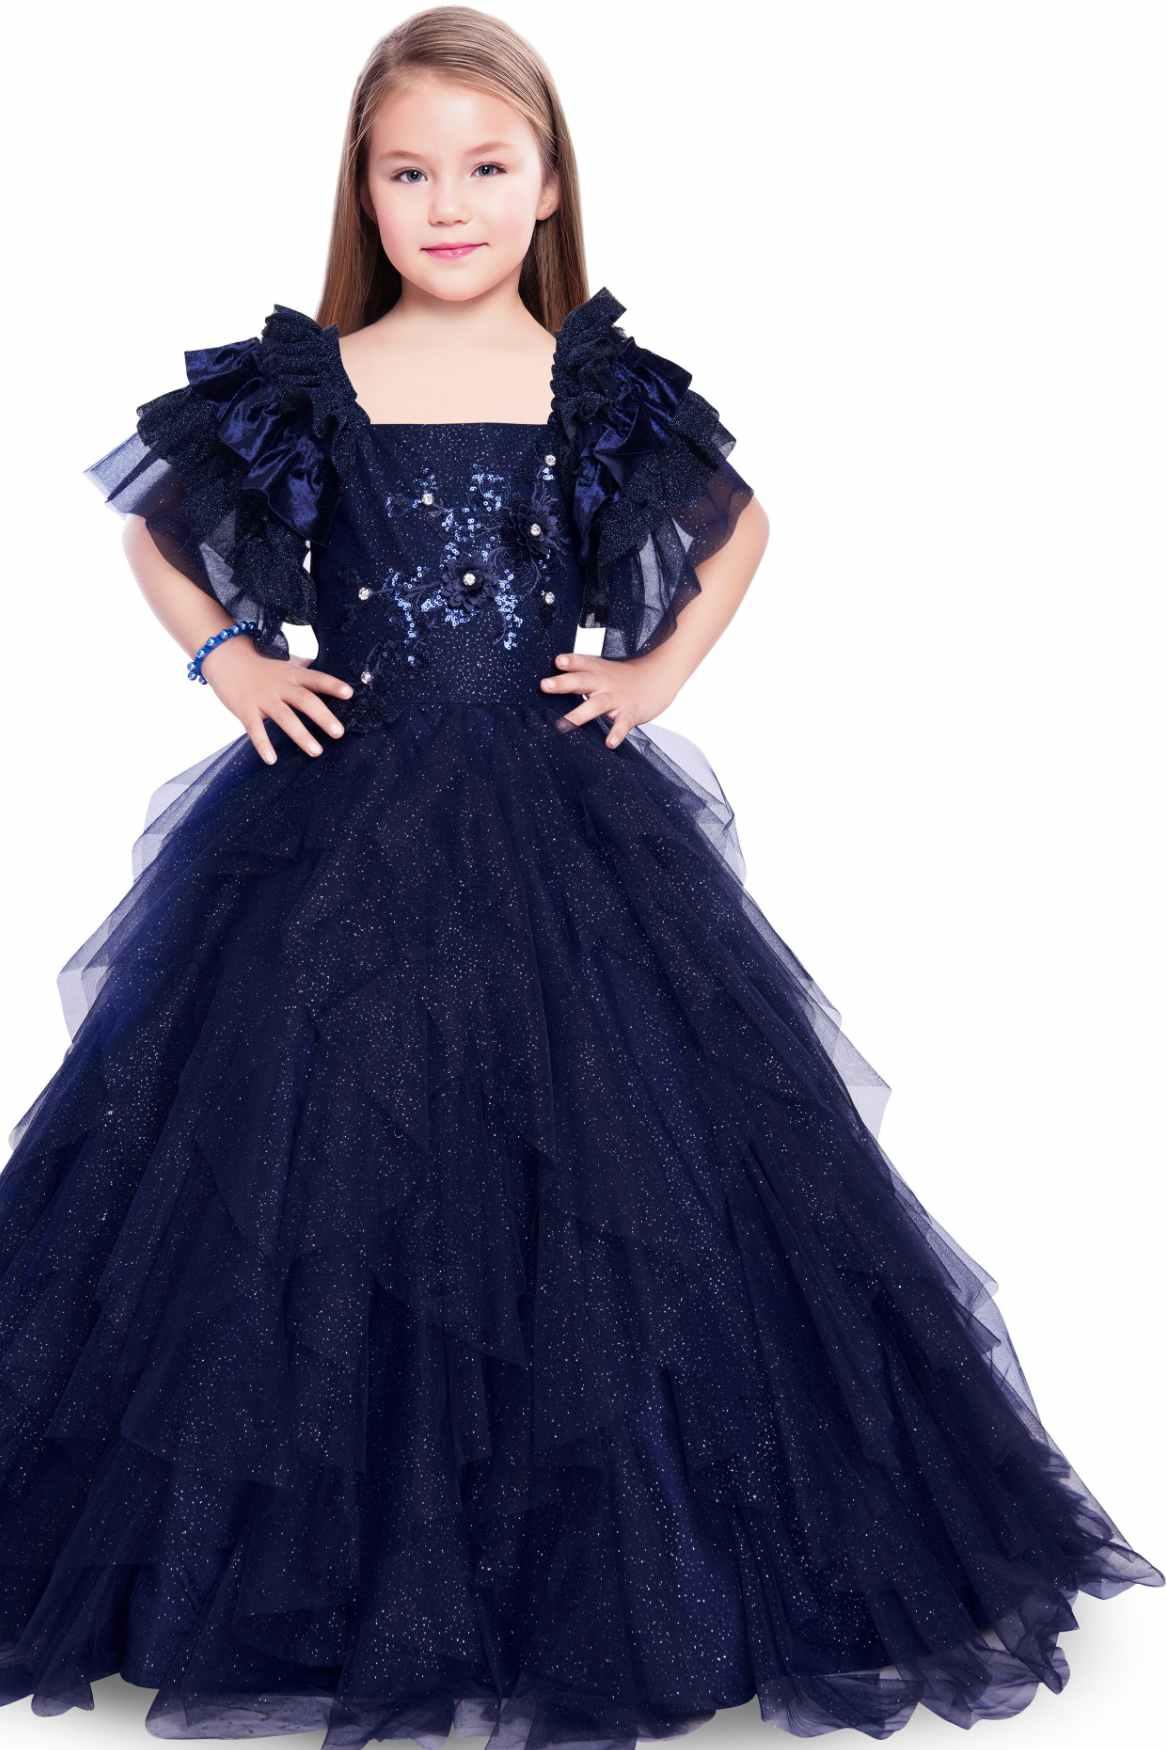 Designer Multilayer Blue Gown With Floral Embroidery For Girls - Lagorii Kids